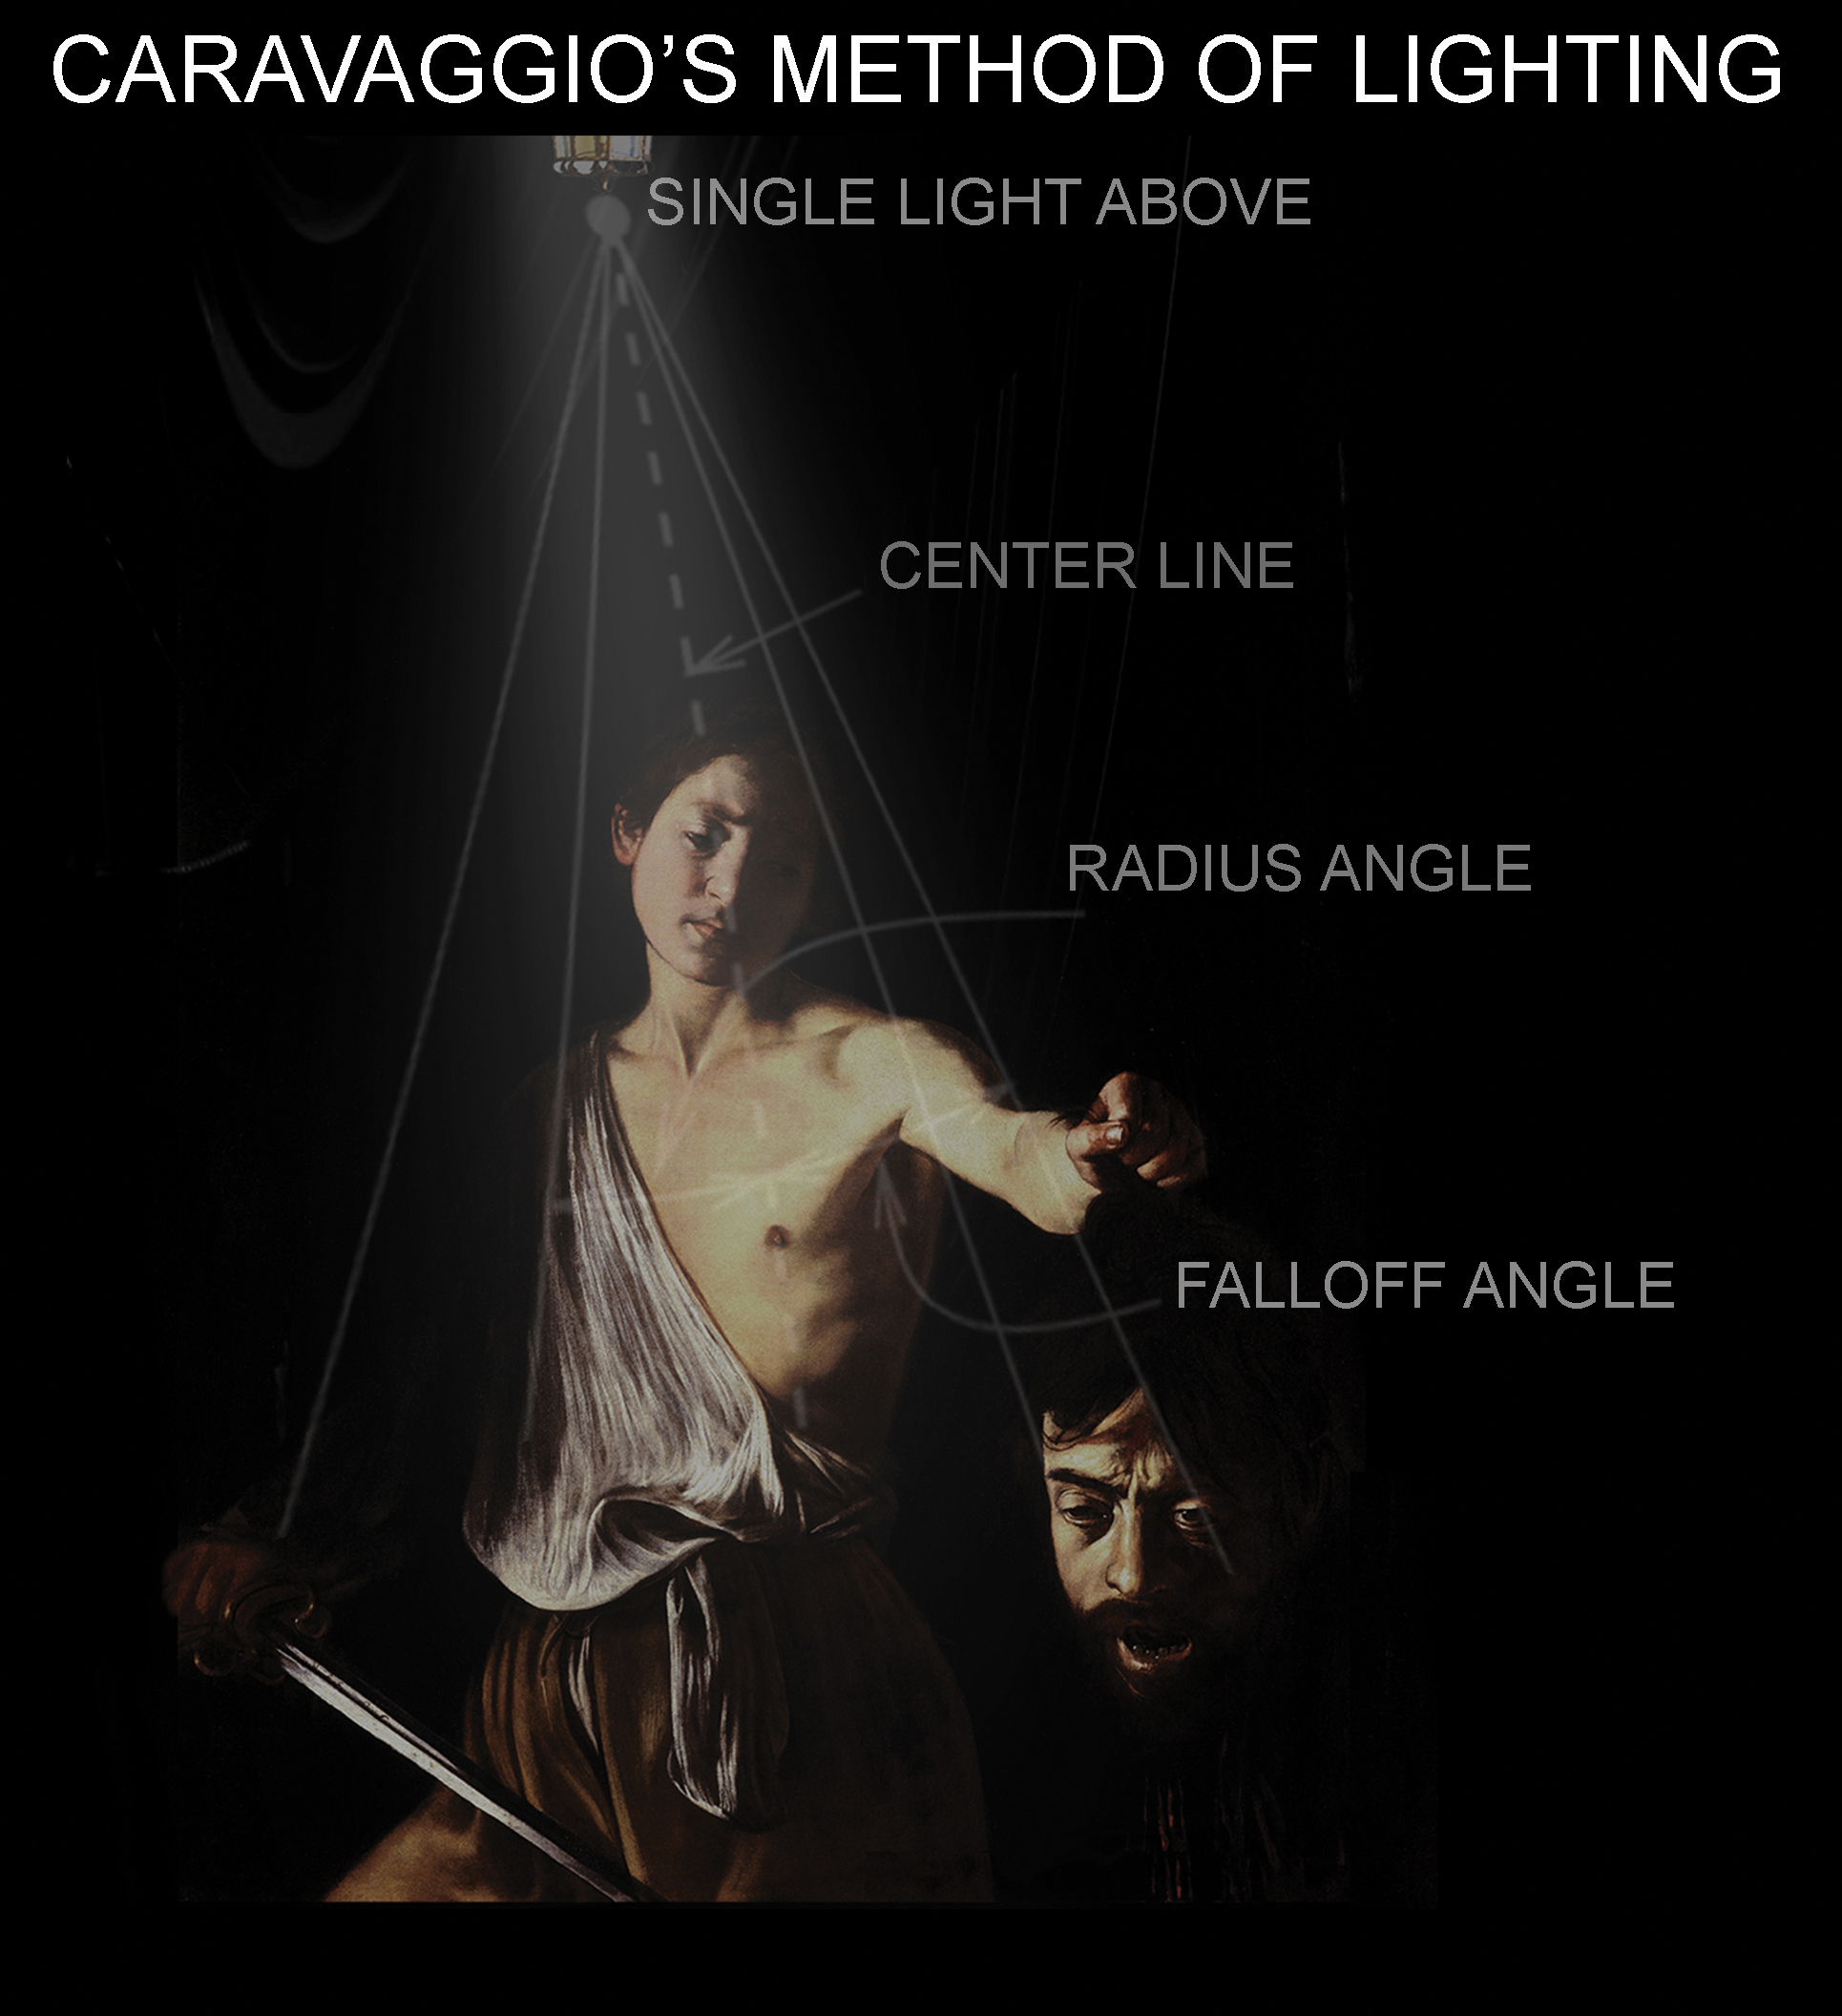 Explanation of lighting with one overhead light, following Caravaggio’s “late style”